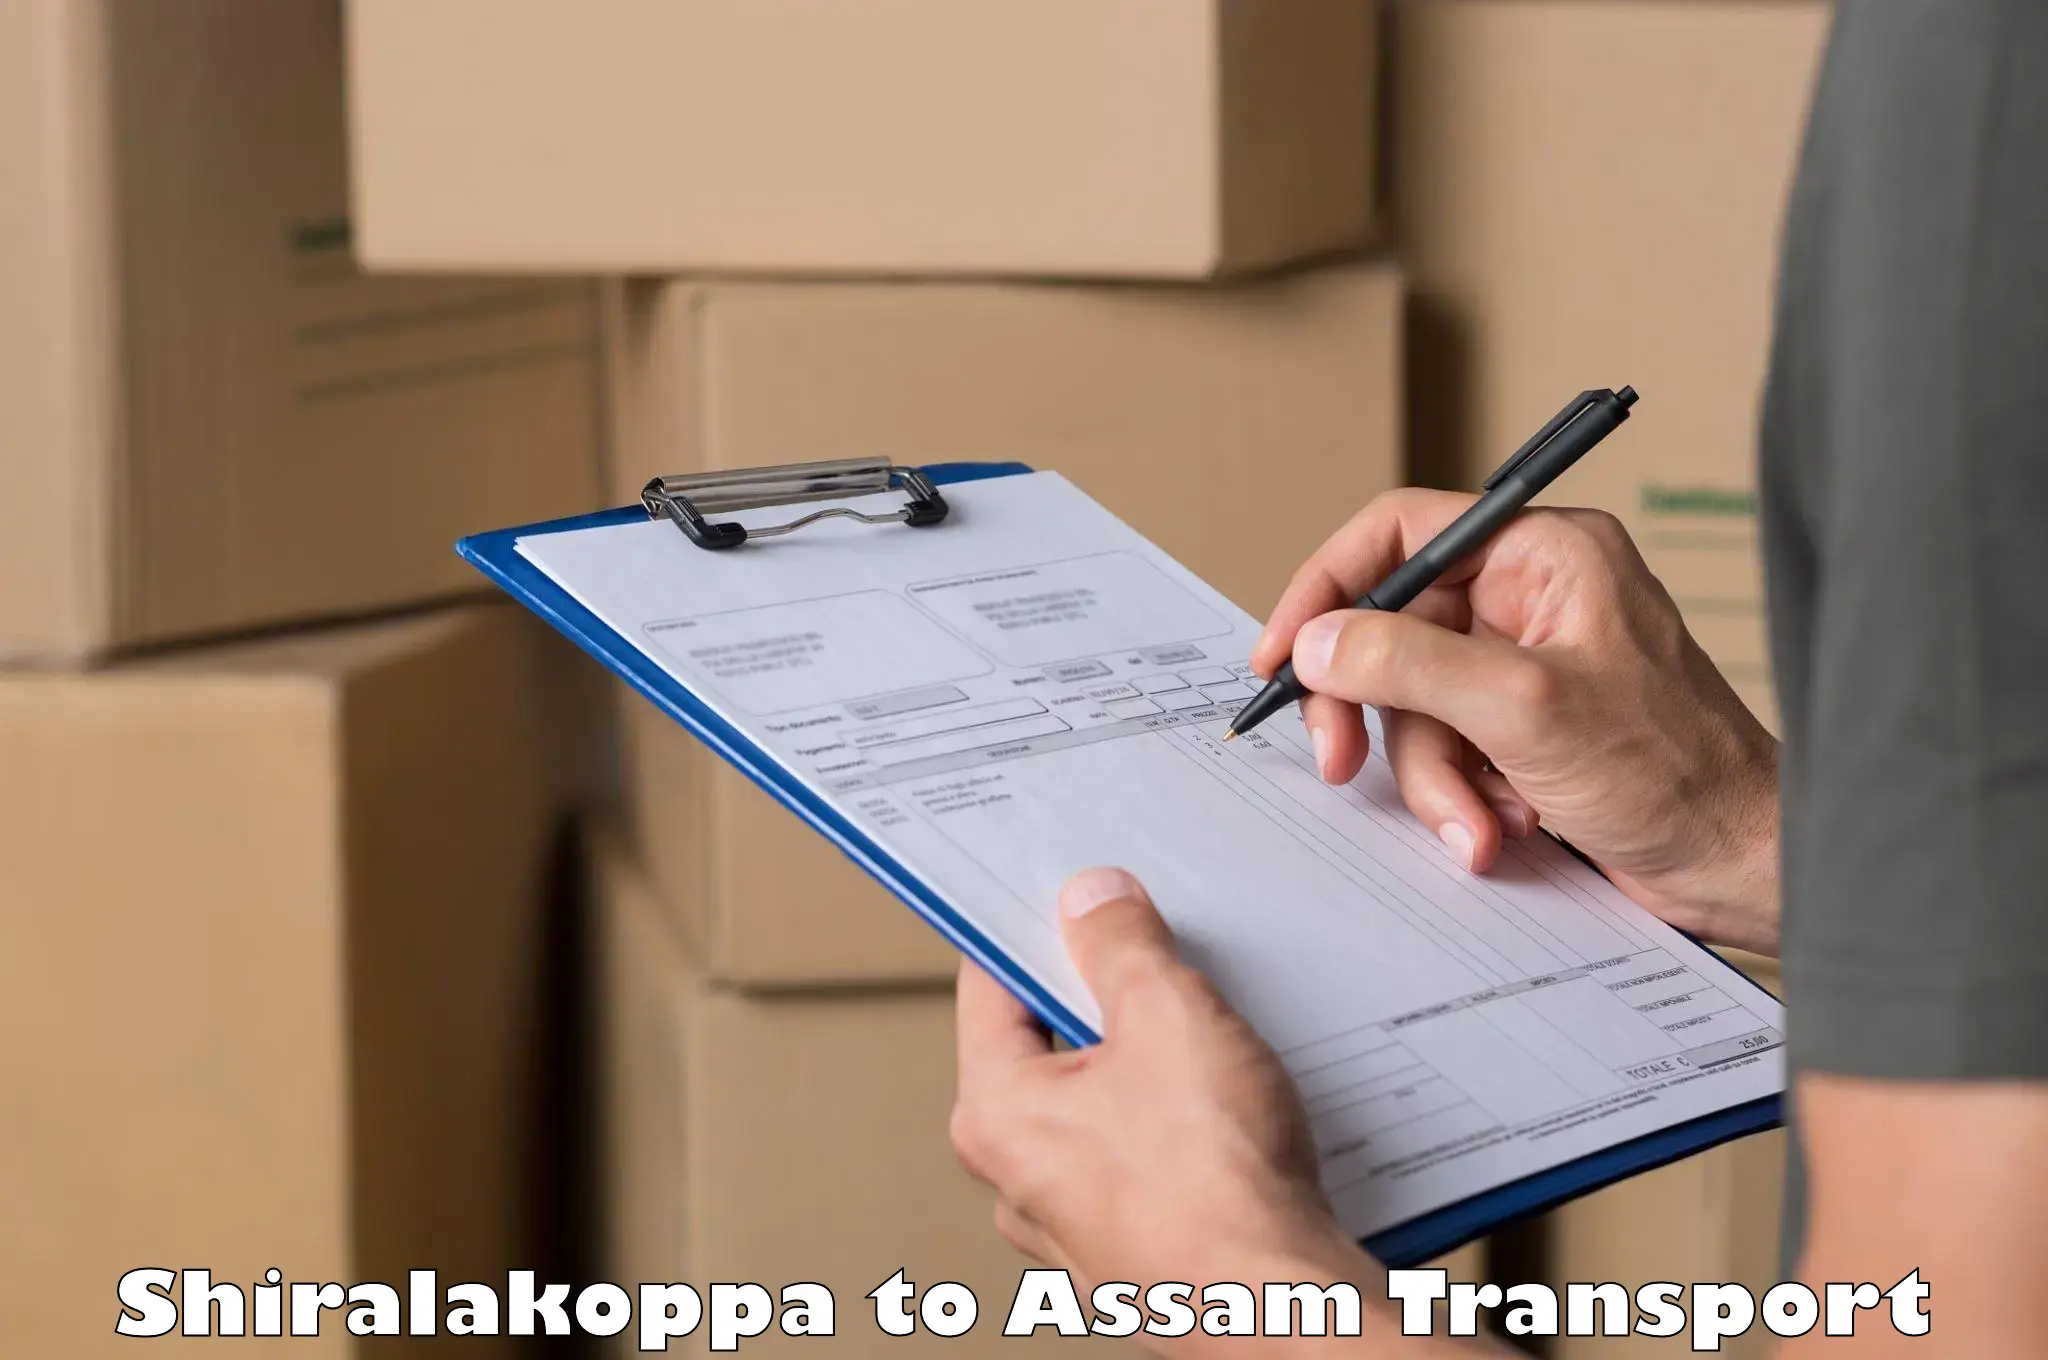 Delivery service Shiralakoppa to Assam